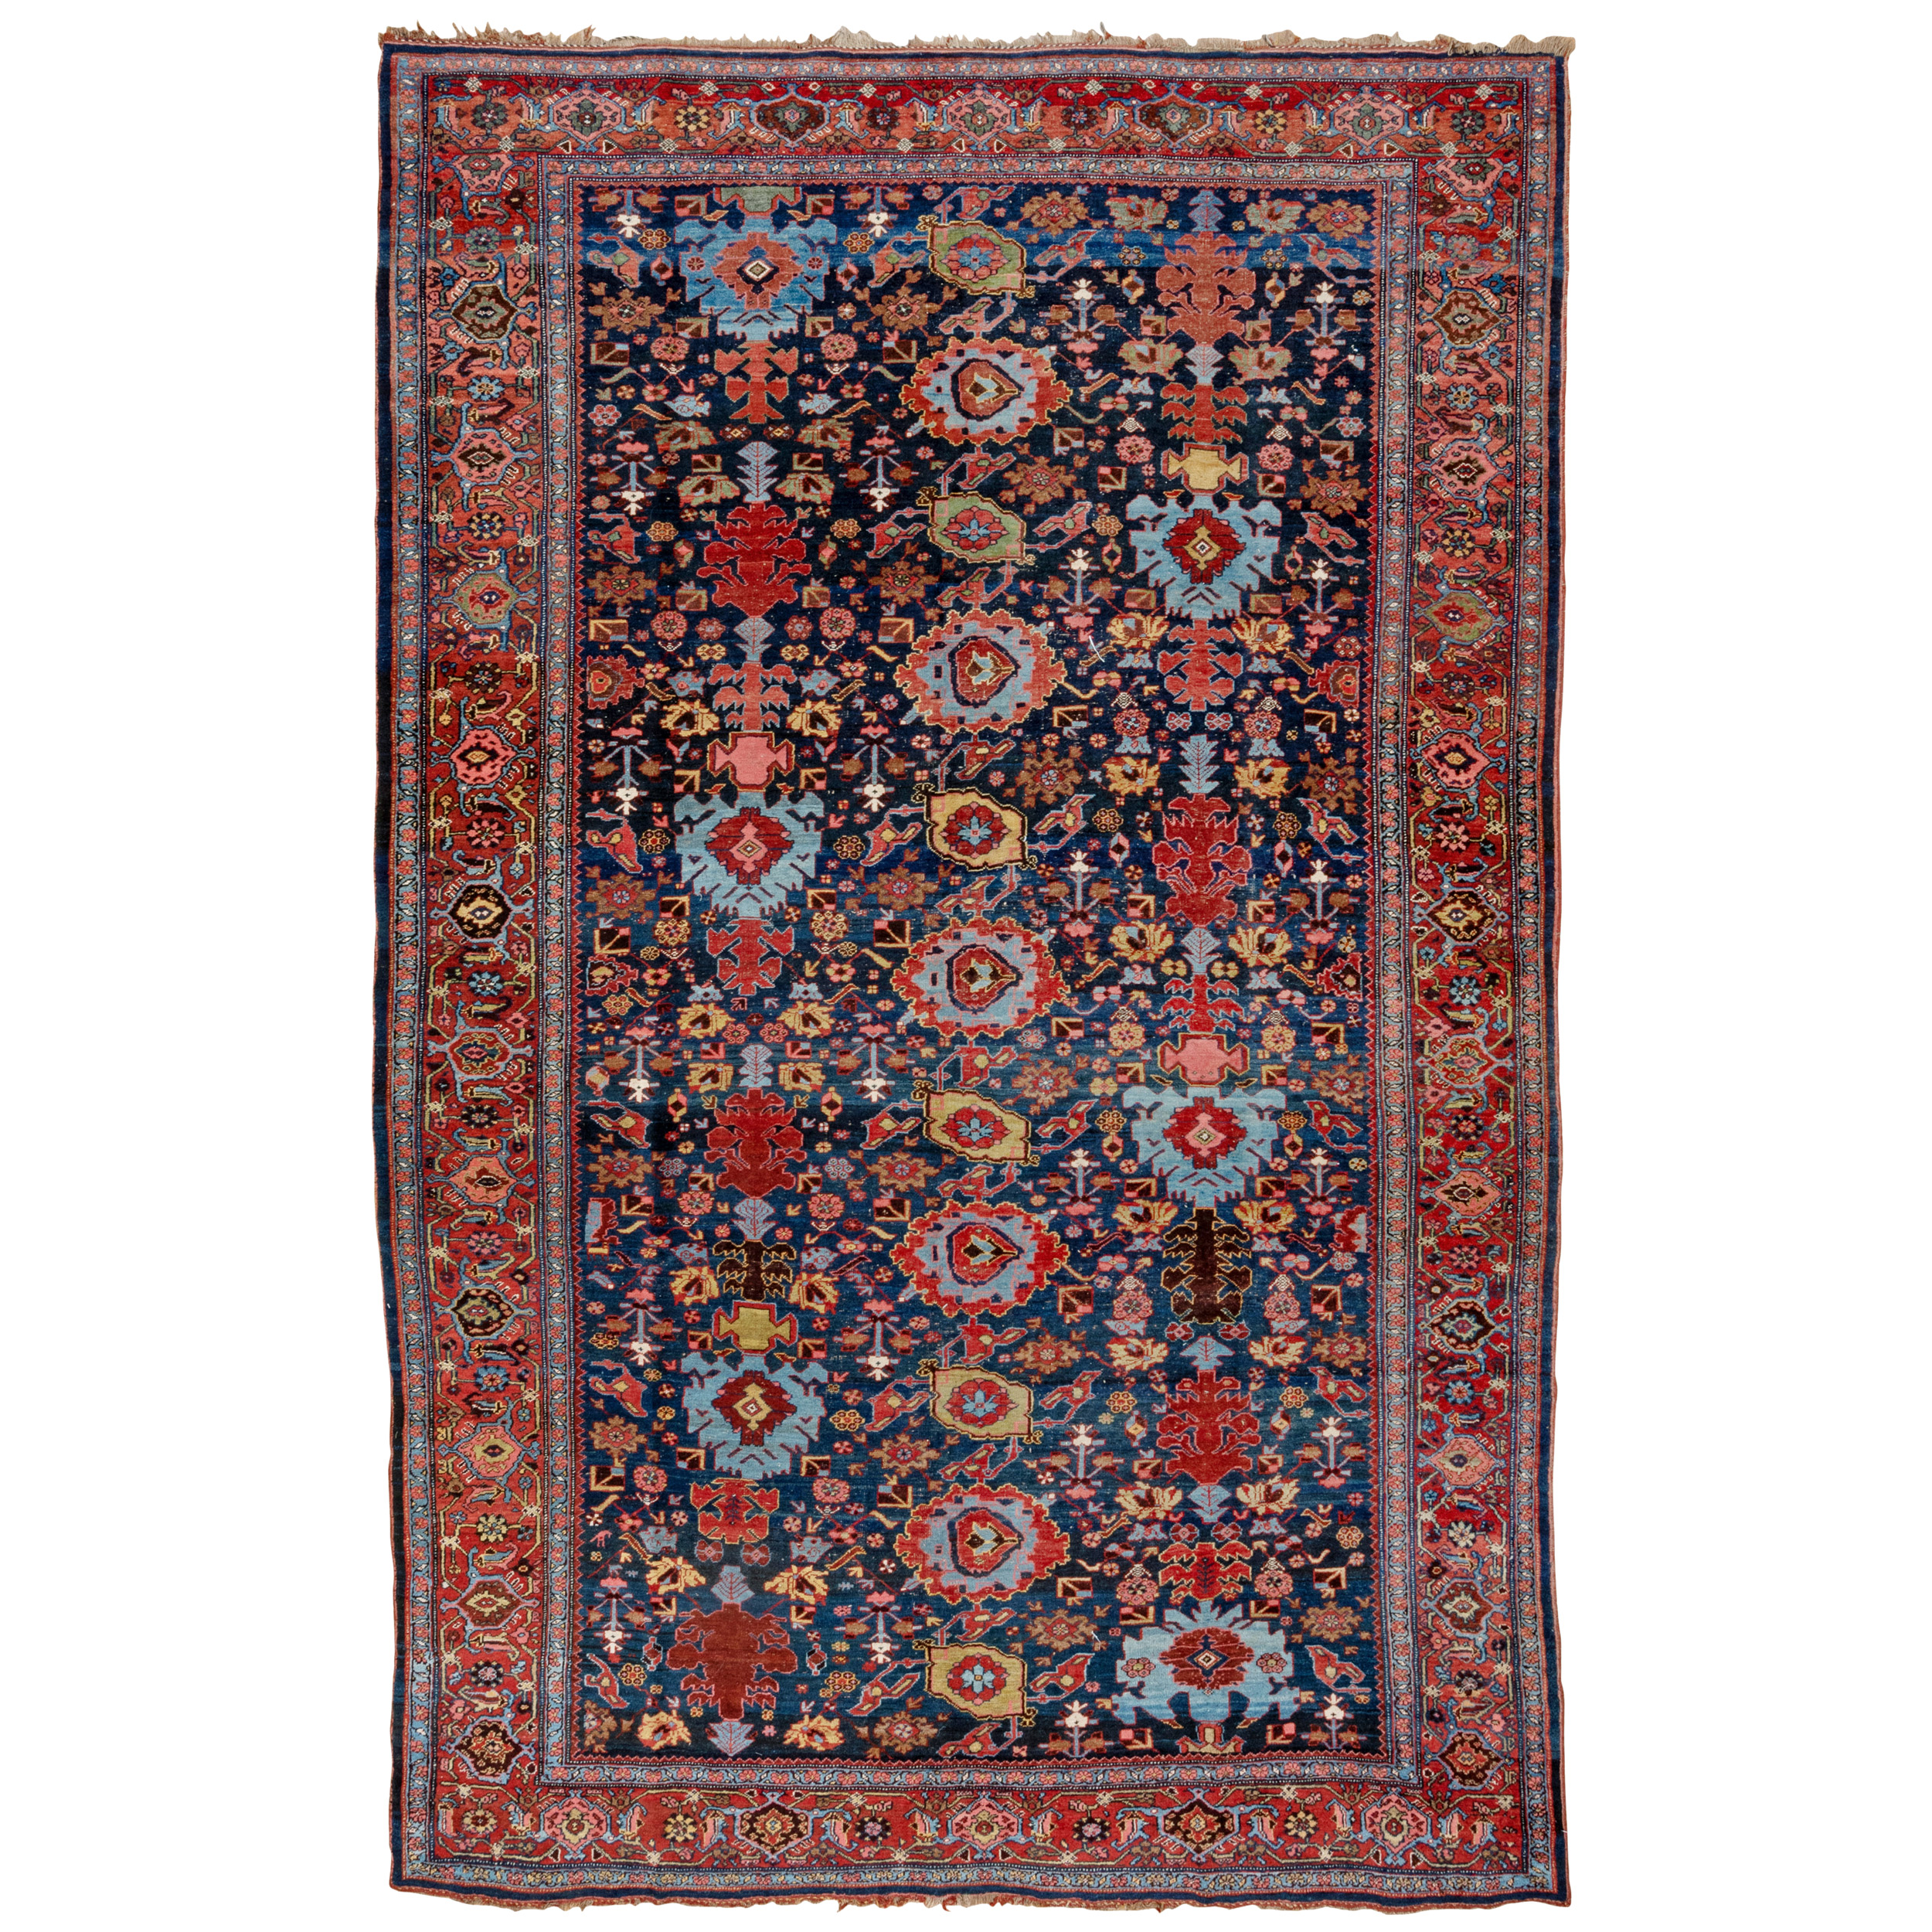 Antique Persian Bidjar carpet with the Harshang design on a navy blue field, Douglas Stock Gallery, antique Persian carpets, antique Oriental rugs Boston,MA area, antique rugs South Natick / Wellesley area, antique rugs New England, antique carpets New York